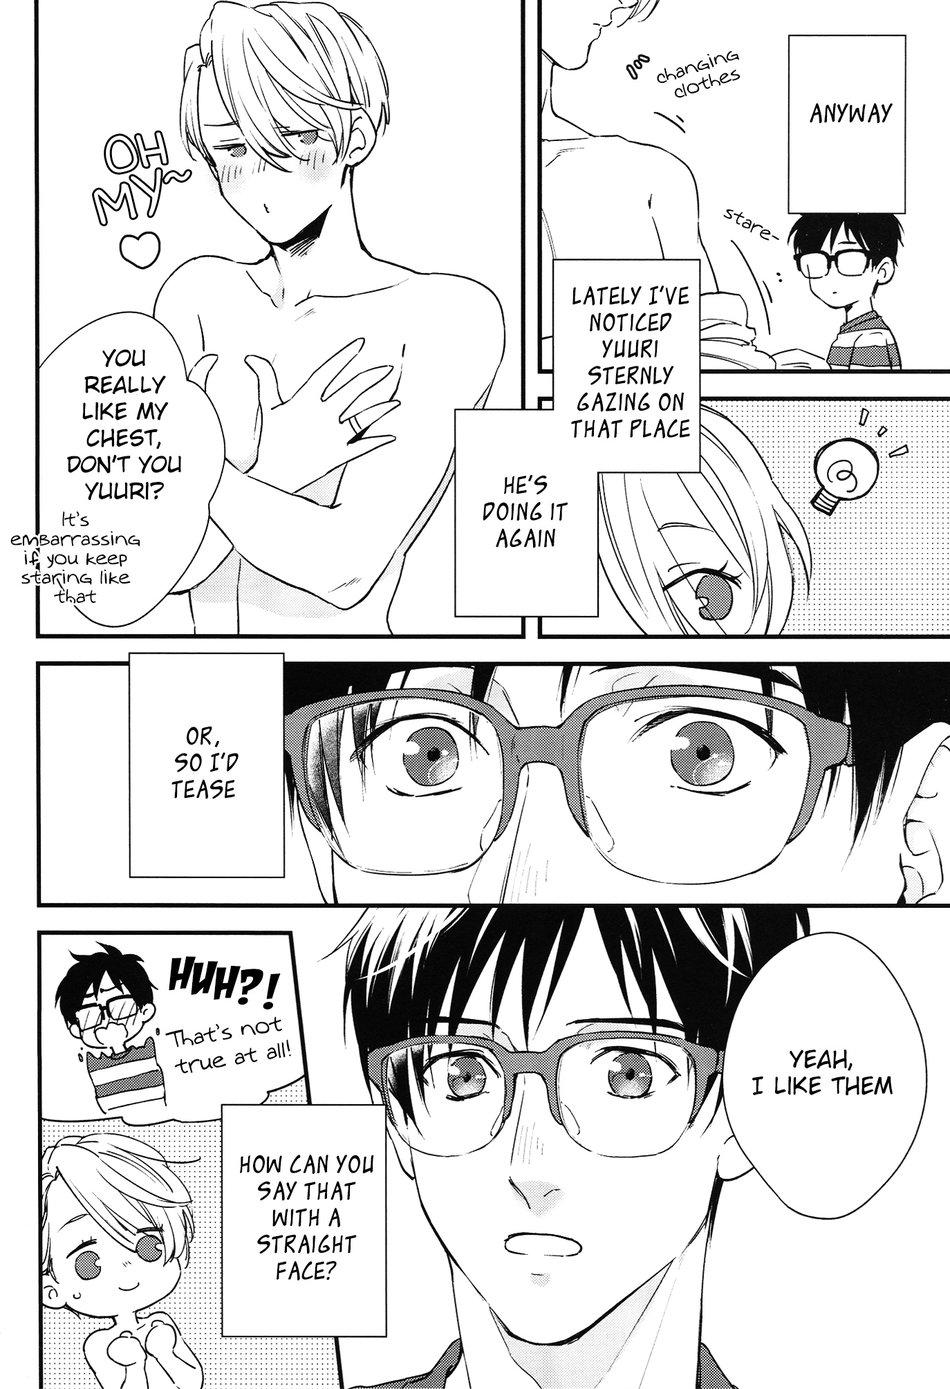 Danish Love Me, Touch Me - Yuri on ice Pack - Page 8